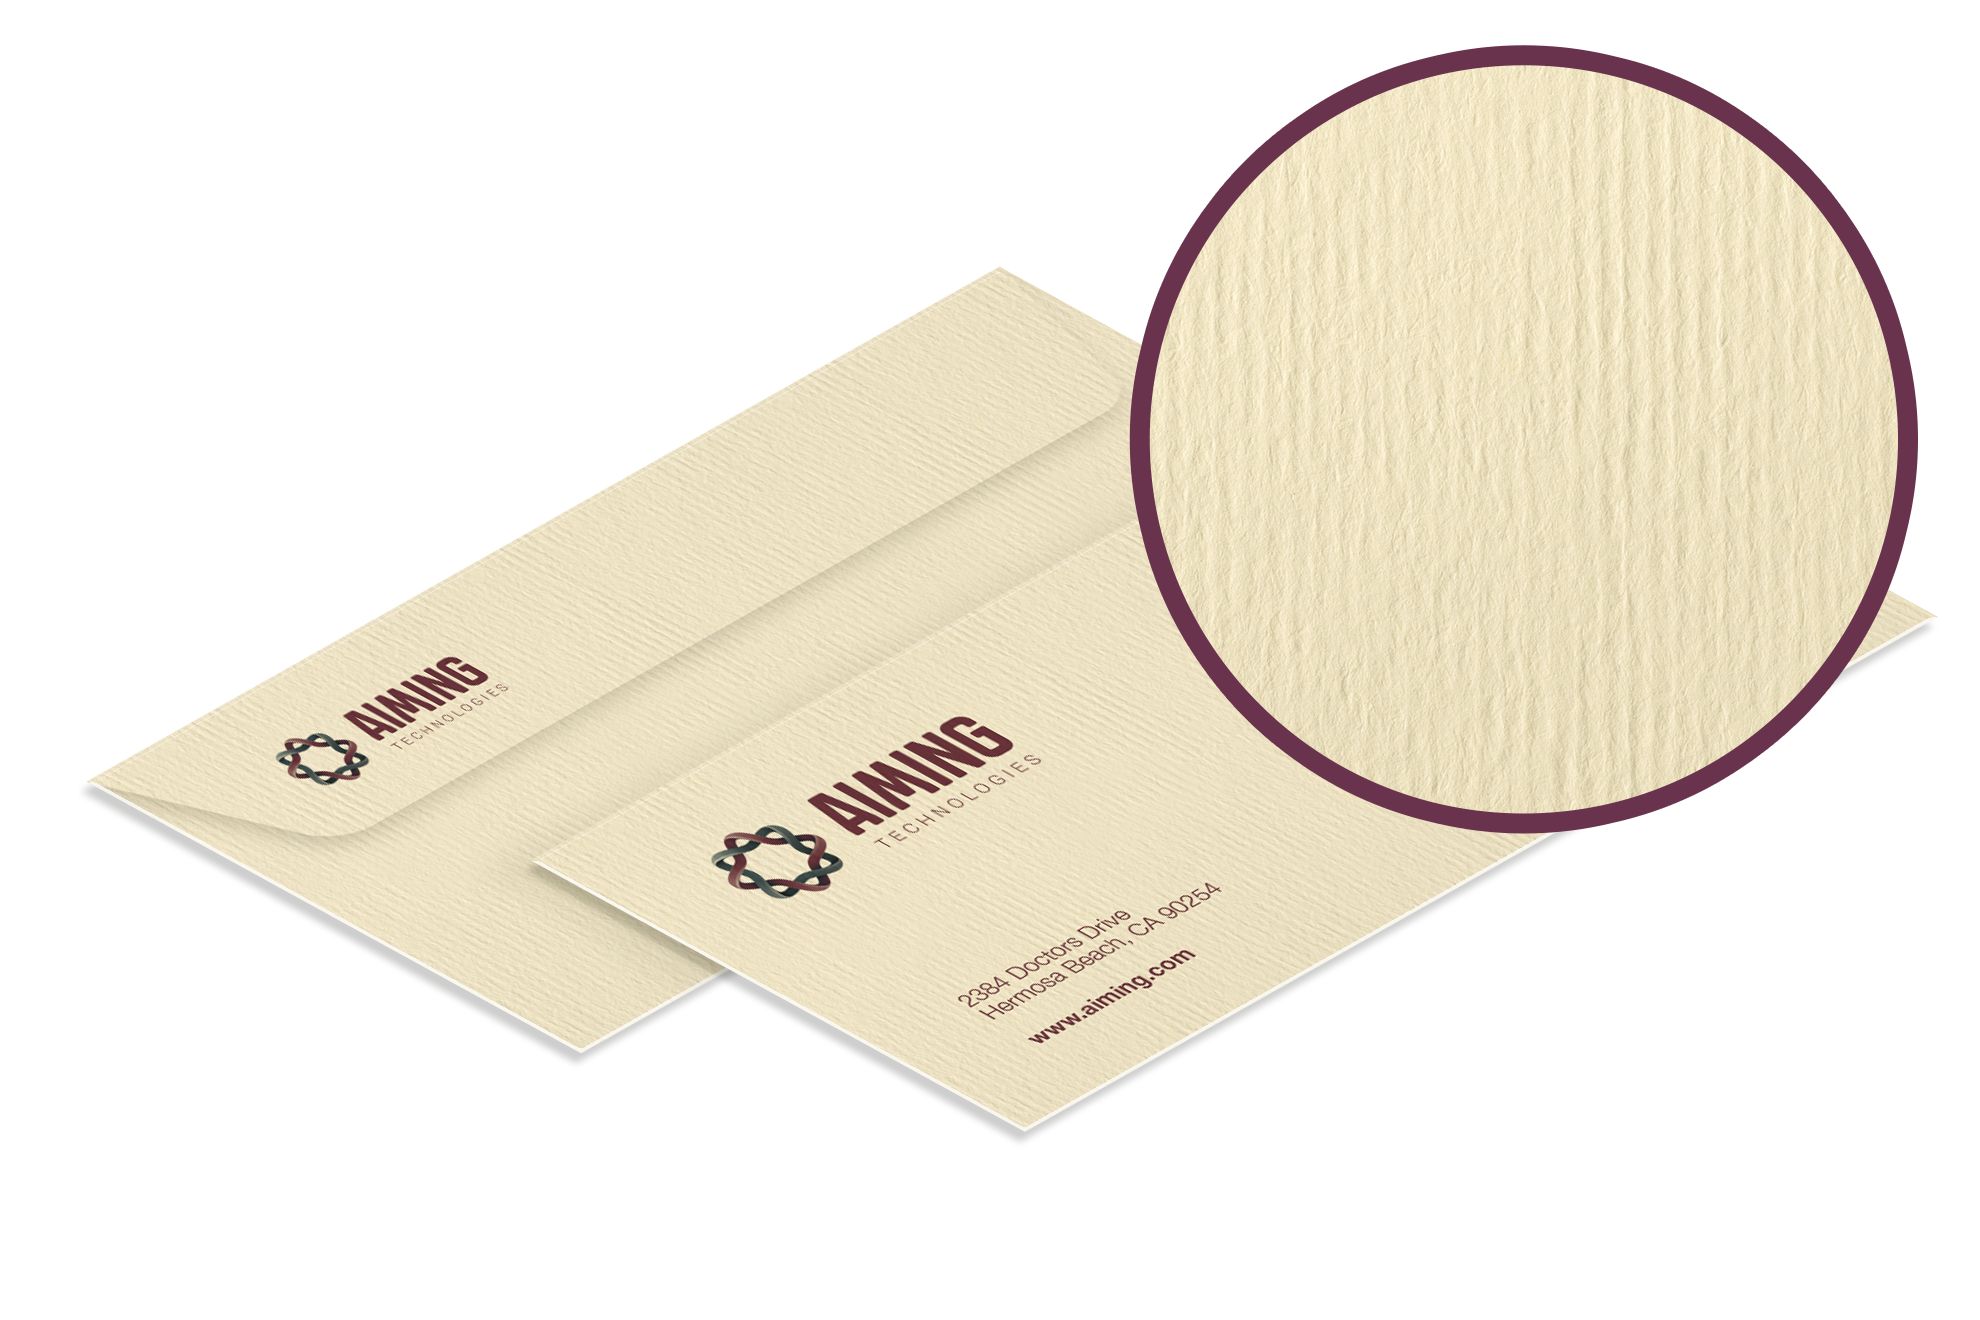 Acquarello Avorio Envelopes, with Sprint24 you print the Quality Online: Customise your Watercolor Ivory envelopes on Sprint24: Pantone colours, embossed printing and various formats. Everything Online, everything at once.